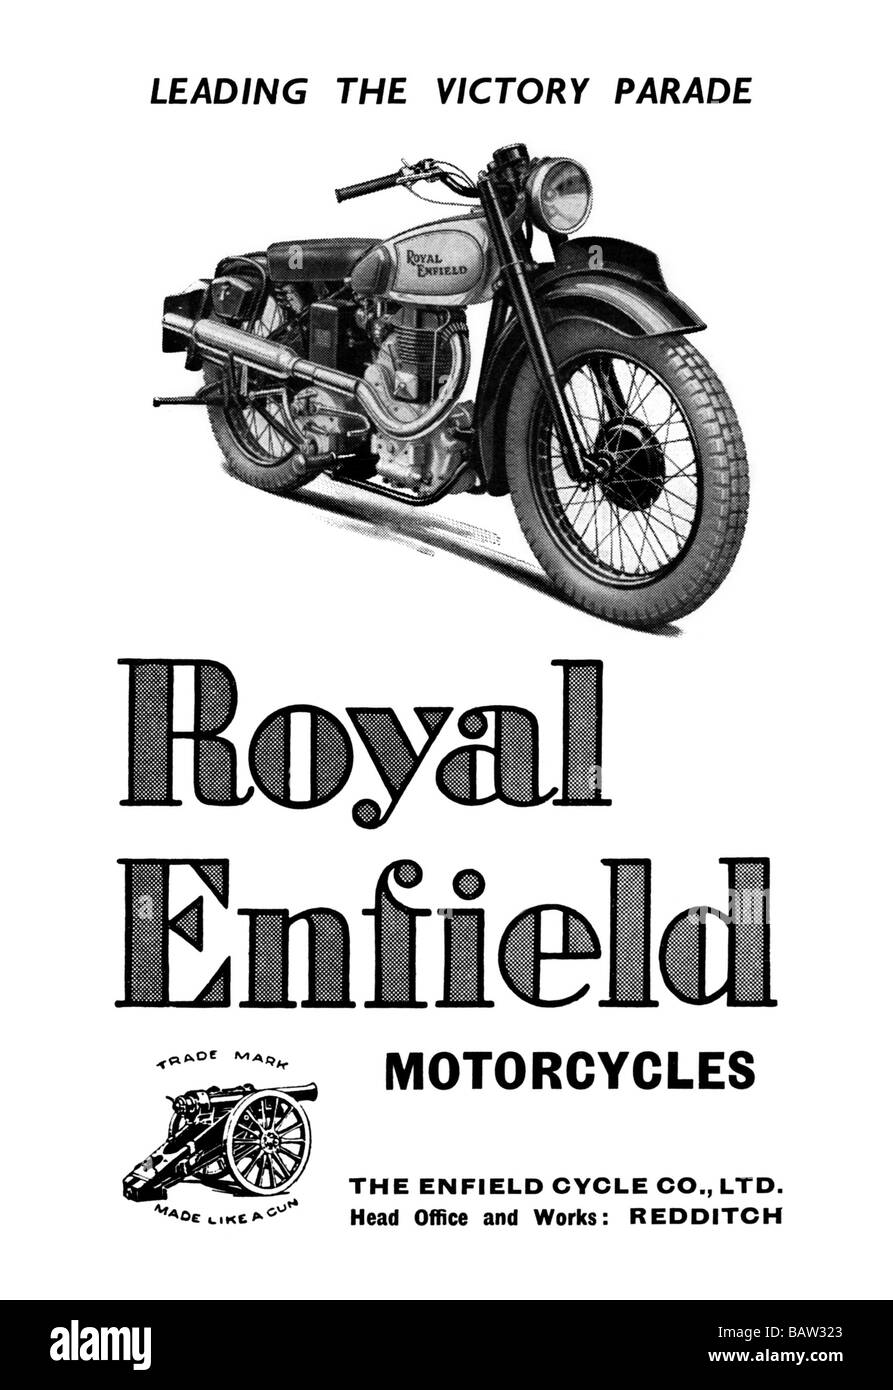 Royal Enfield Motorcycles: Leading the Victory Parade Stock Photo